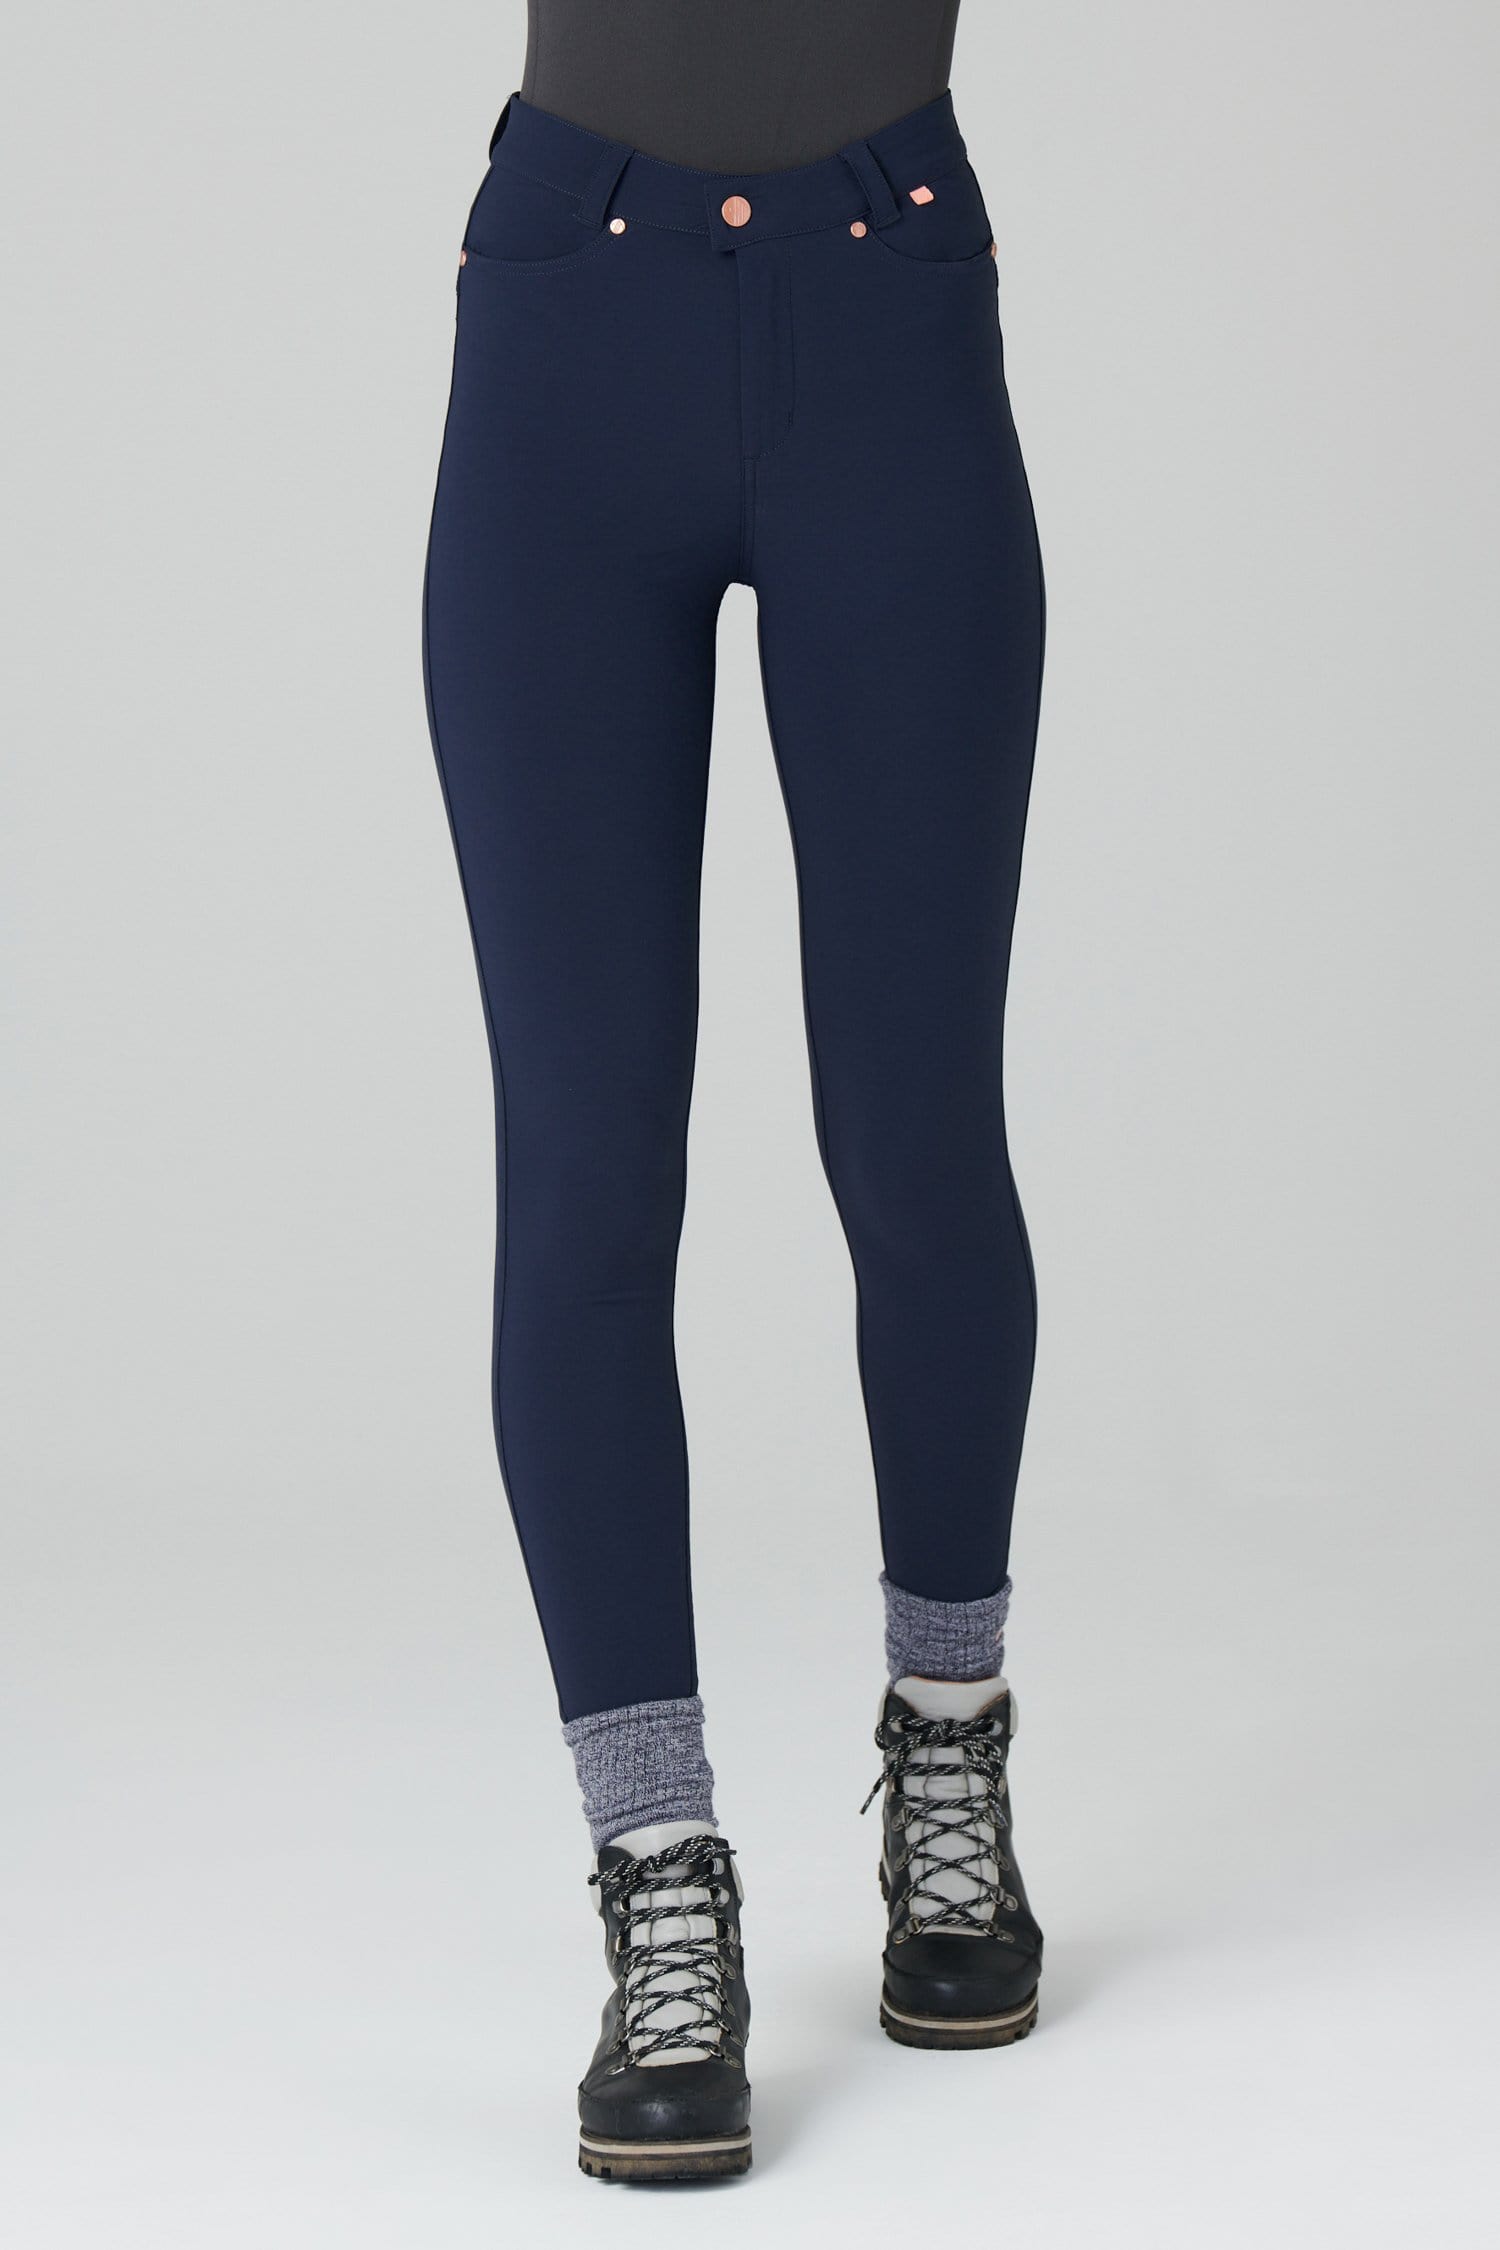 Max Stretch Skinny Outdoor Trousers - Deep Navy - 38r / Uk20 - Womens - Acai Outdoorwear